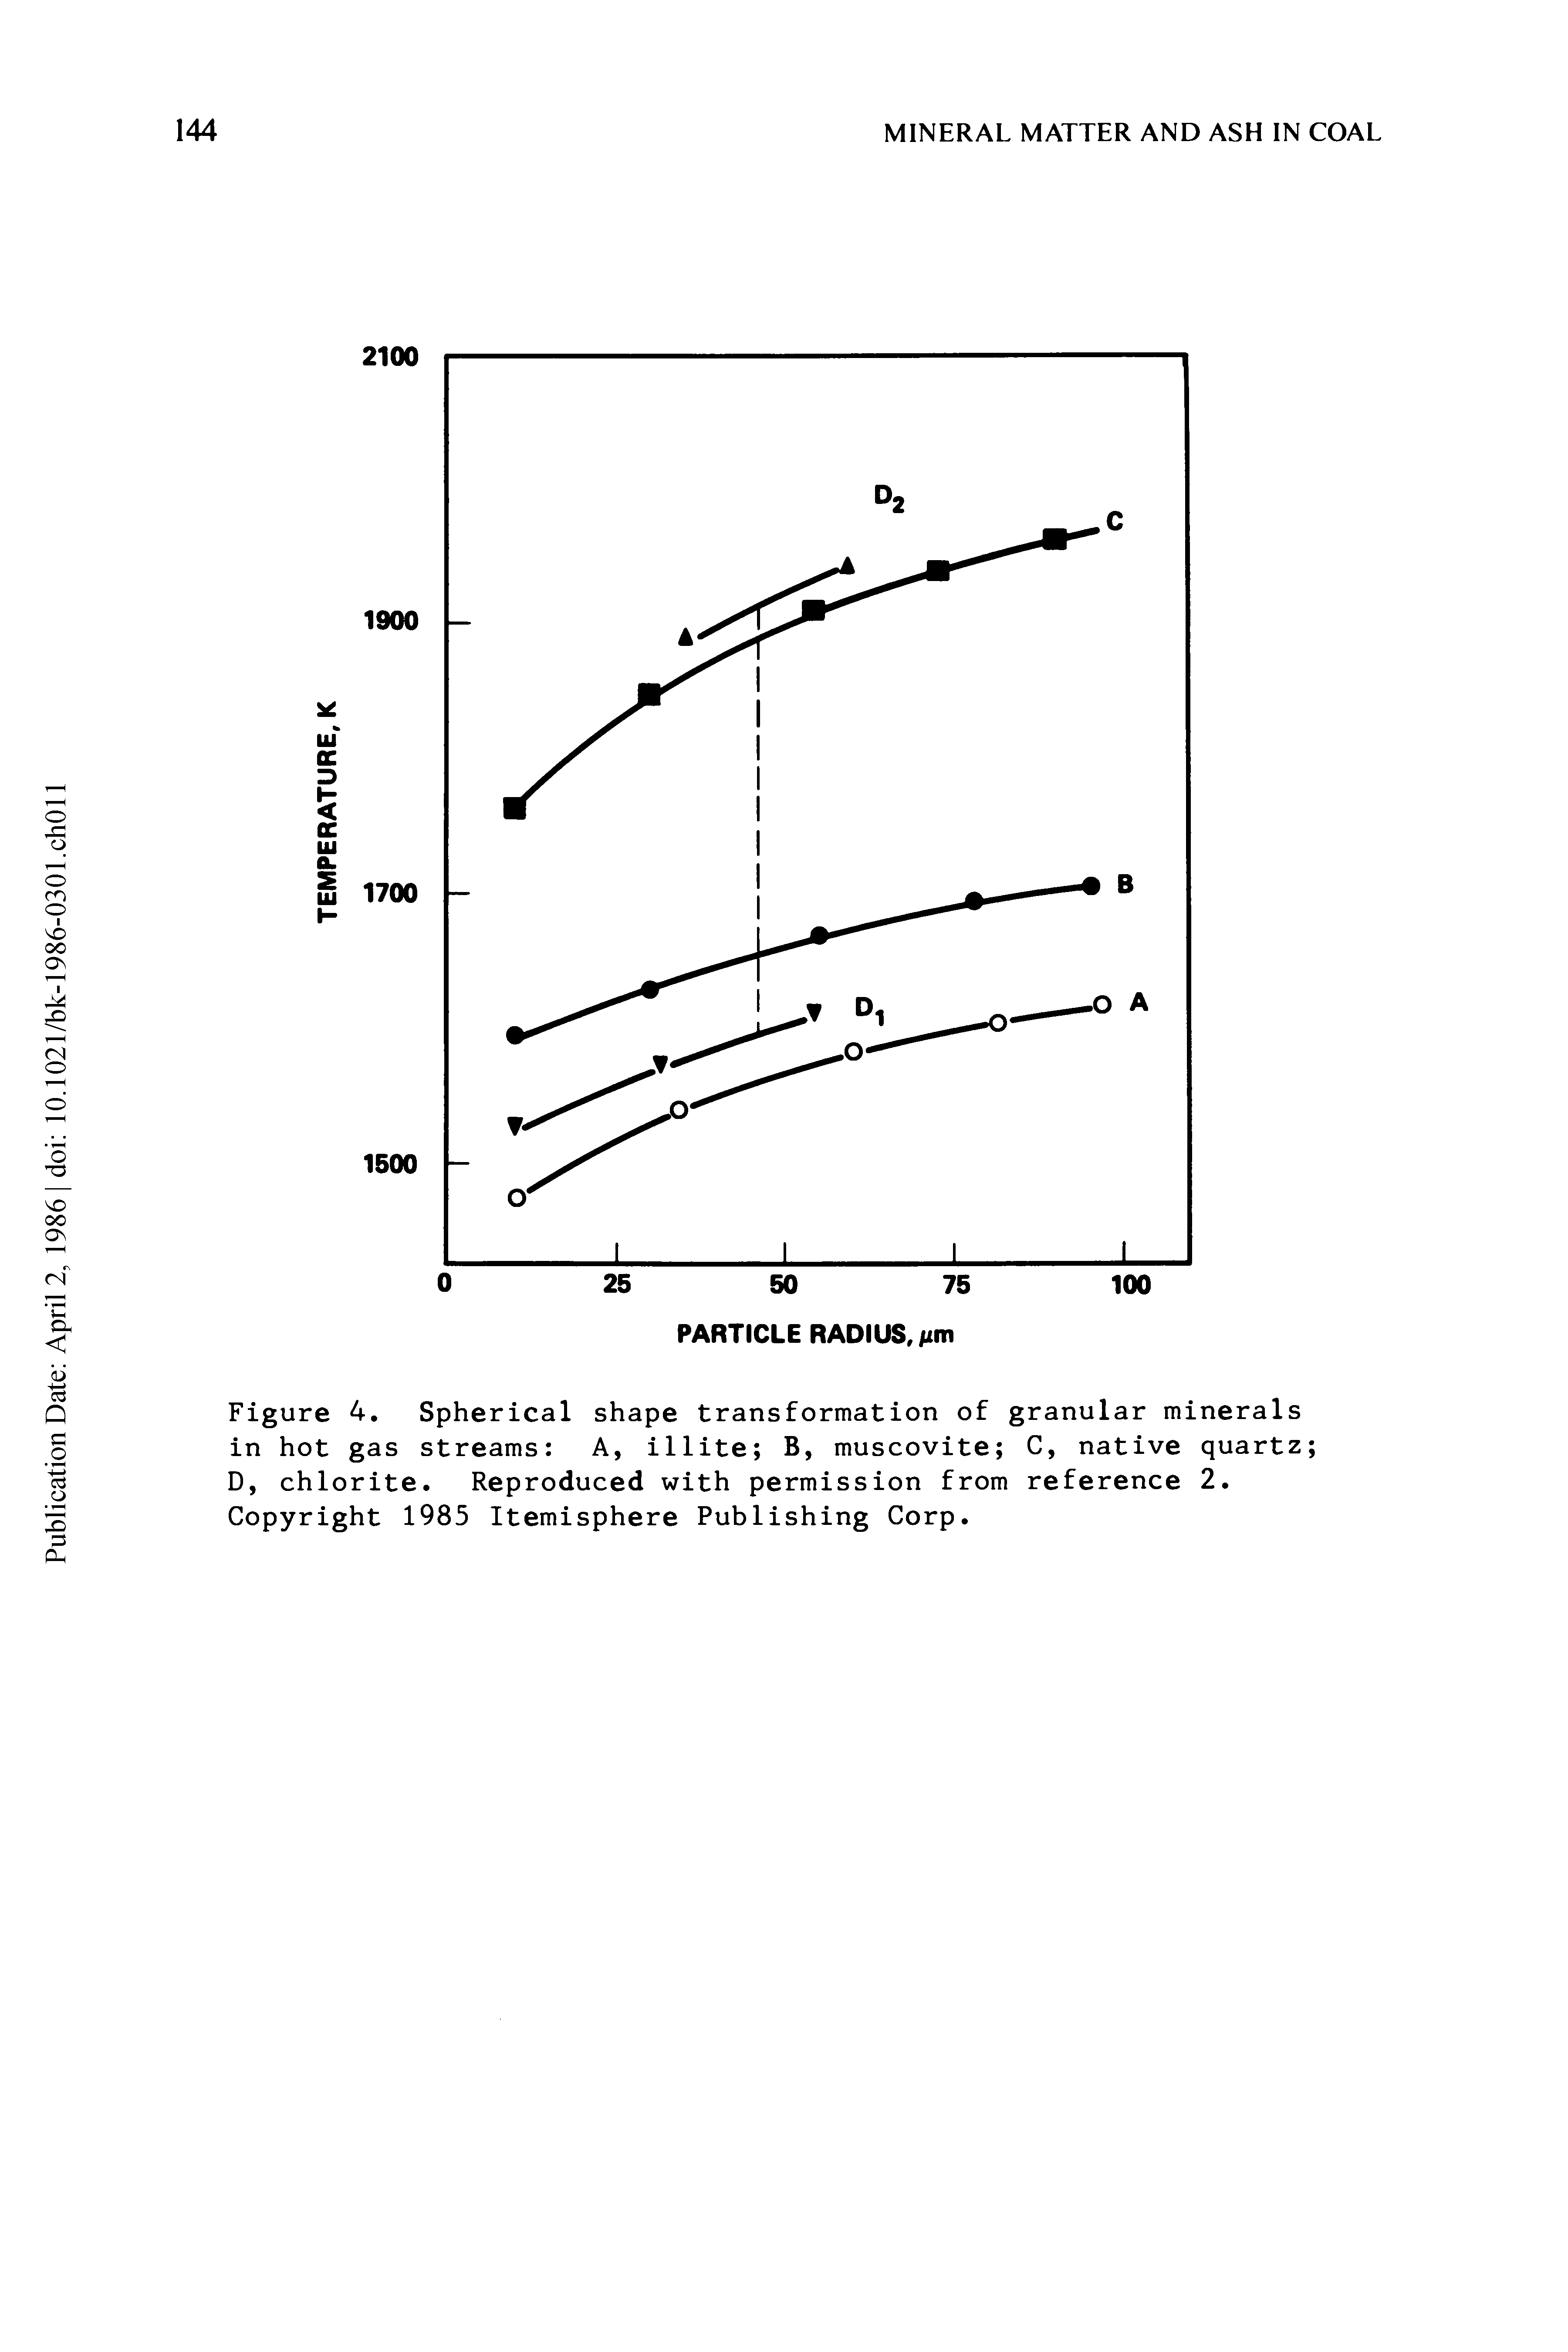 Figure 4. Spherical shape transformation of granular minerals in hot gas streams A, illite B, muscovite C, native quartz D, chlorite. Reproduced with permission from reference 2. Copyright 1985 Itemisphere Publishing Corp.